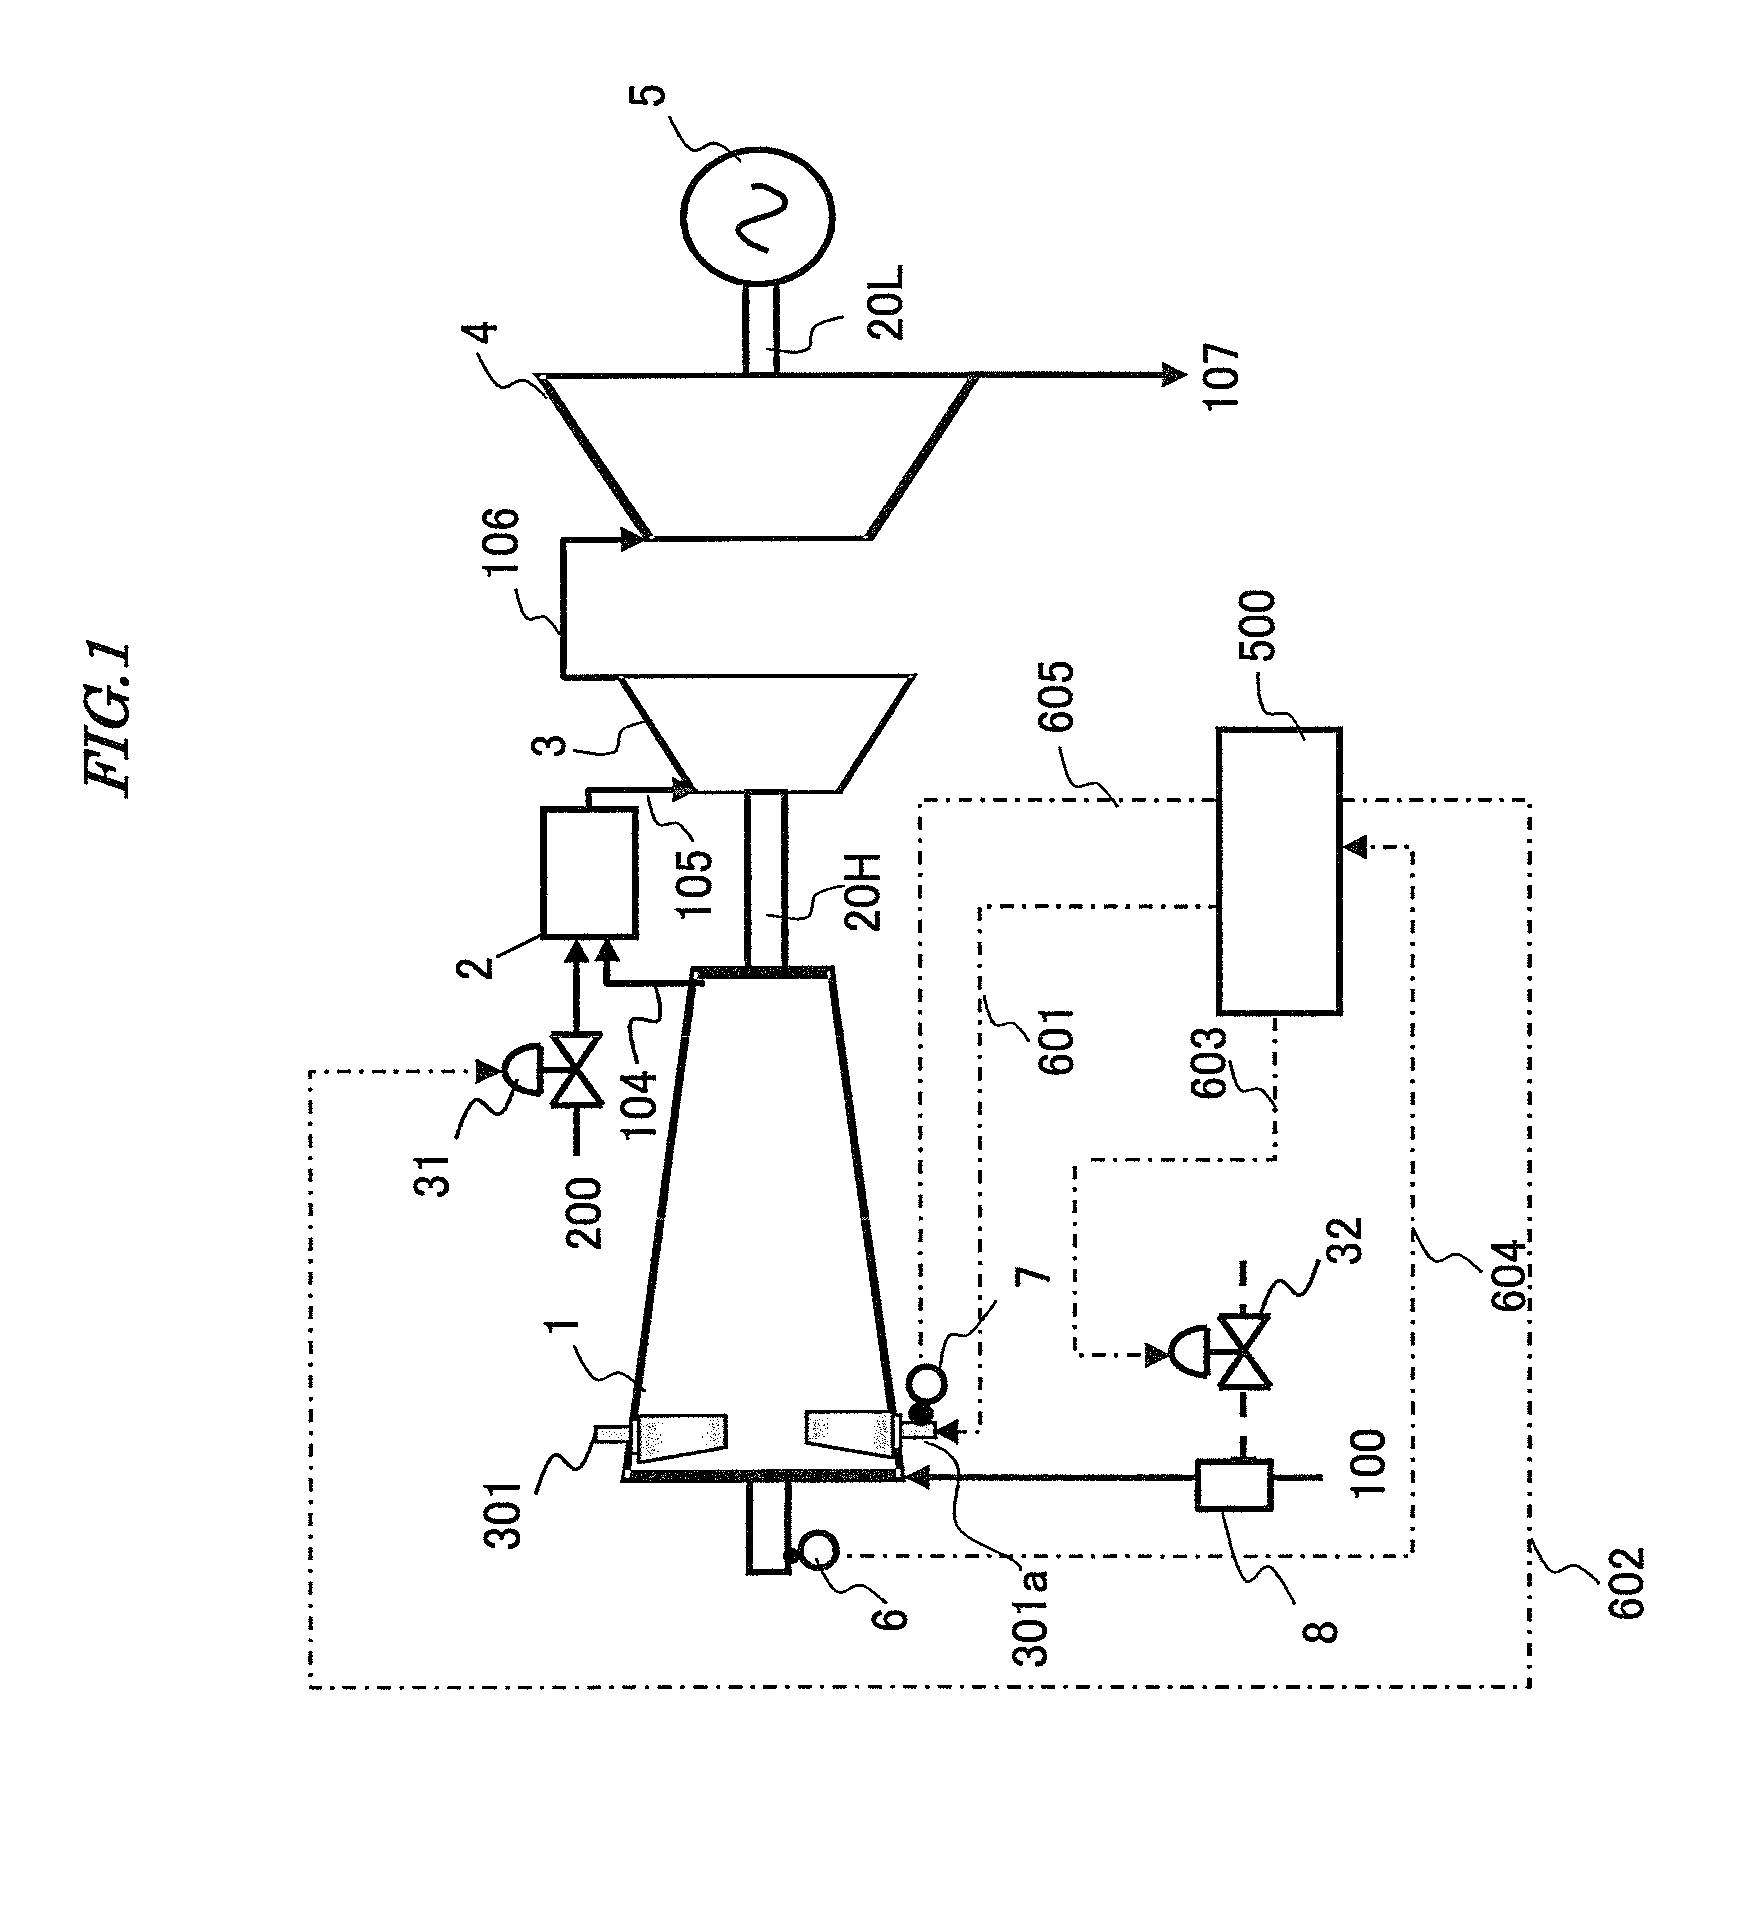 System and method of controlling a two-shaft gas turbine